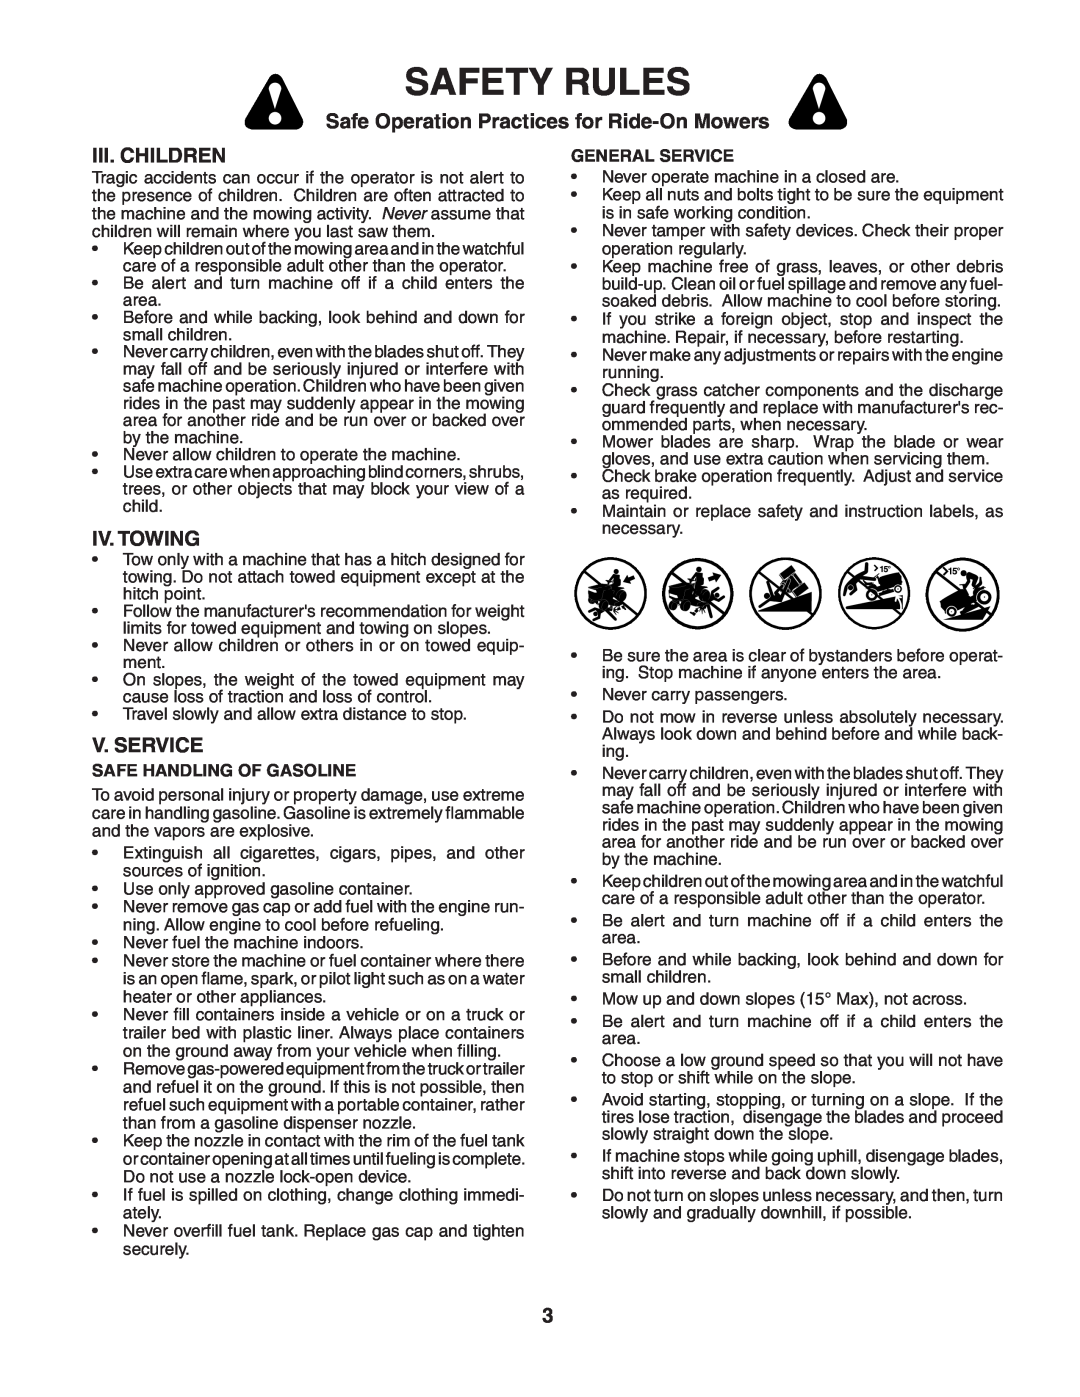 McCulloch MC1136B manual Iii. Children, Iv. Towing, V. Service, Safety Rules, Safe Operation Practices for Ride-On Mowers 